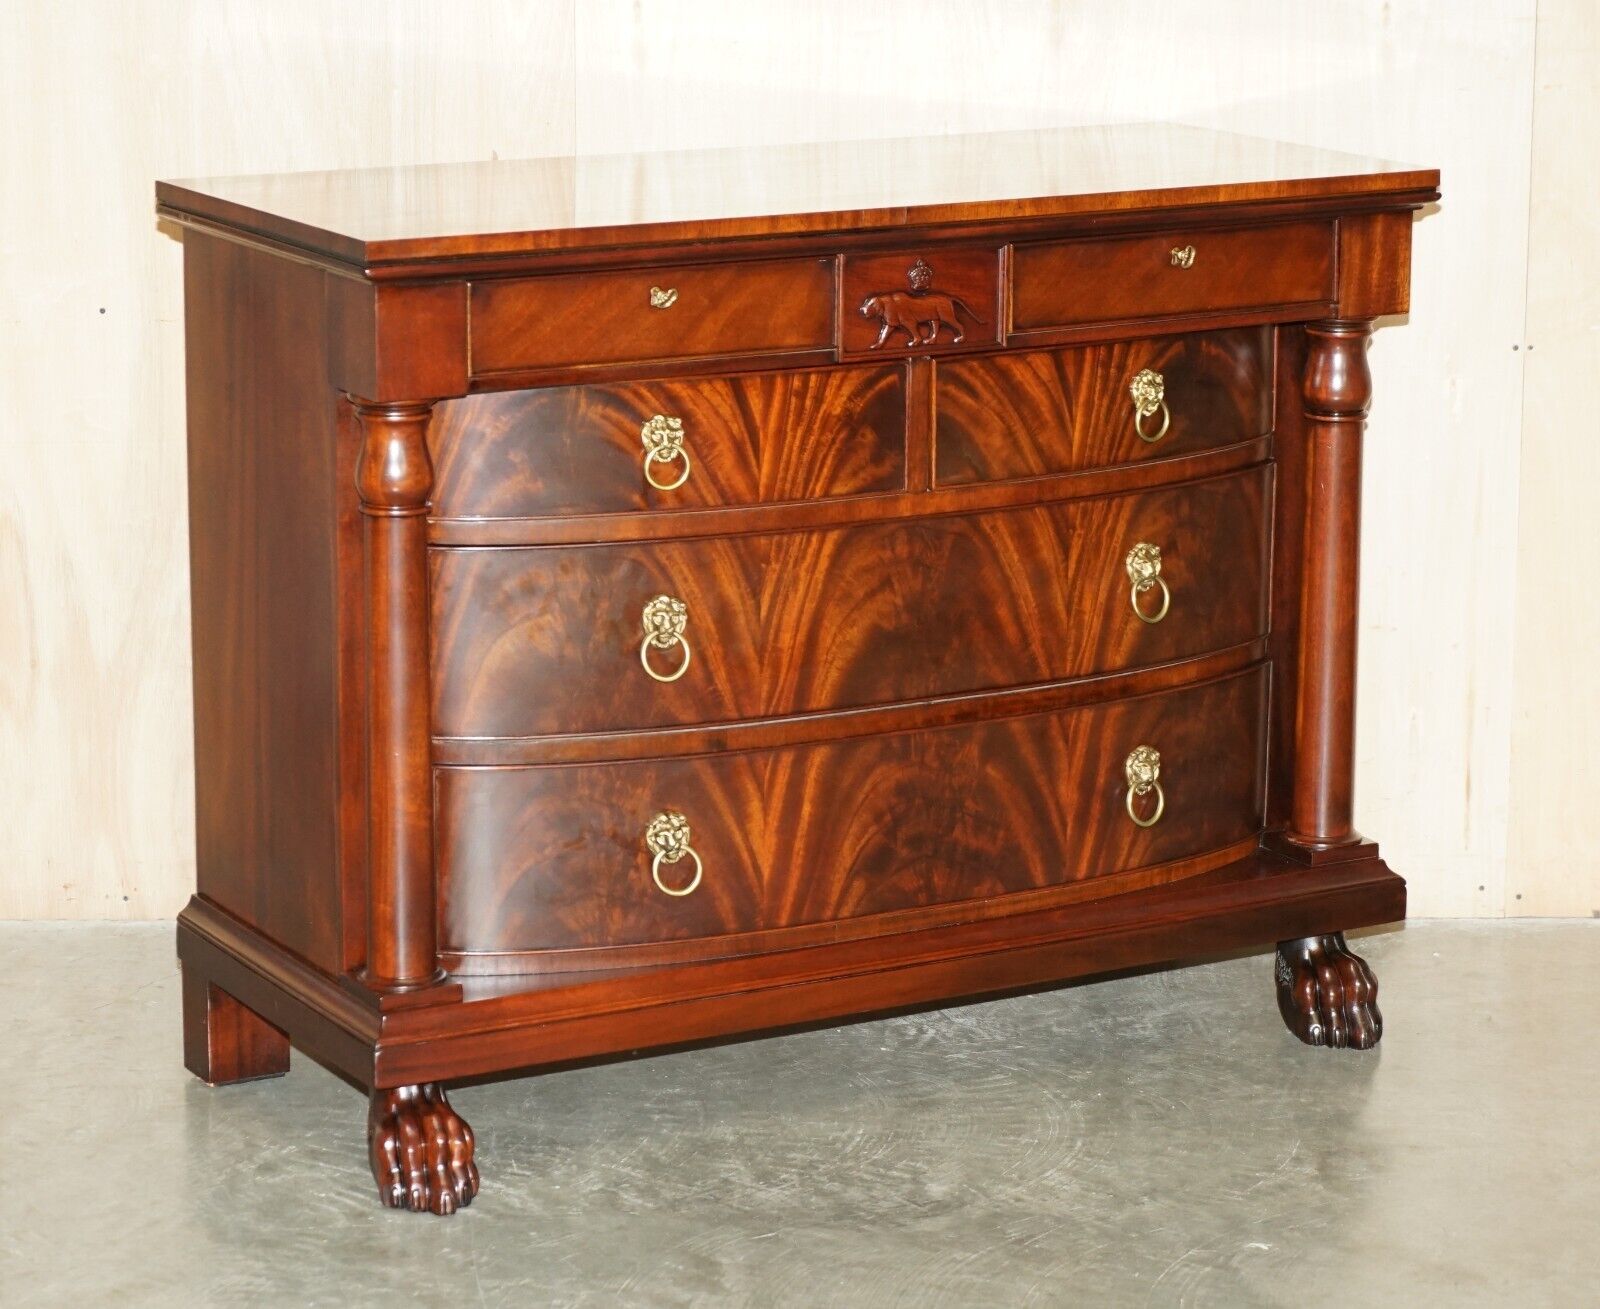 FLAMED MAHOGANY RALPH LAUREN BOW FRONTED EMPIRE LION'S HEAD CHEST OF DRAWERS